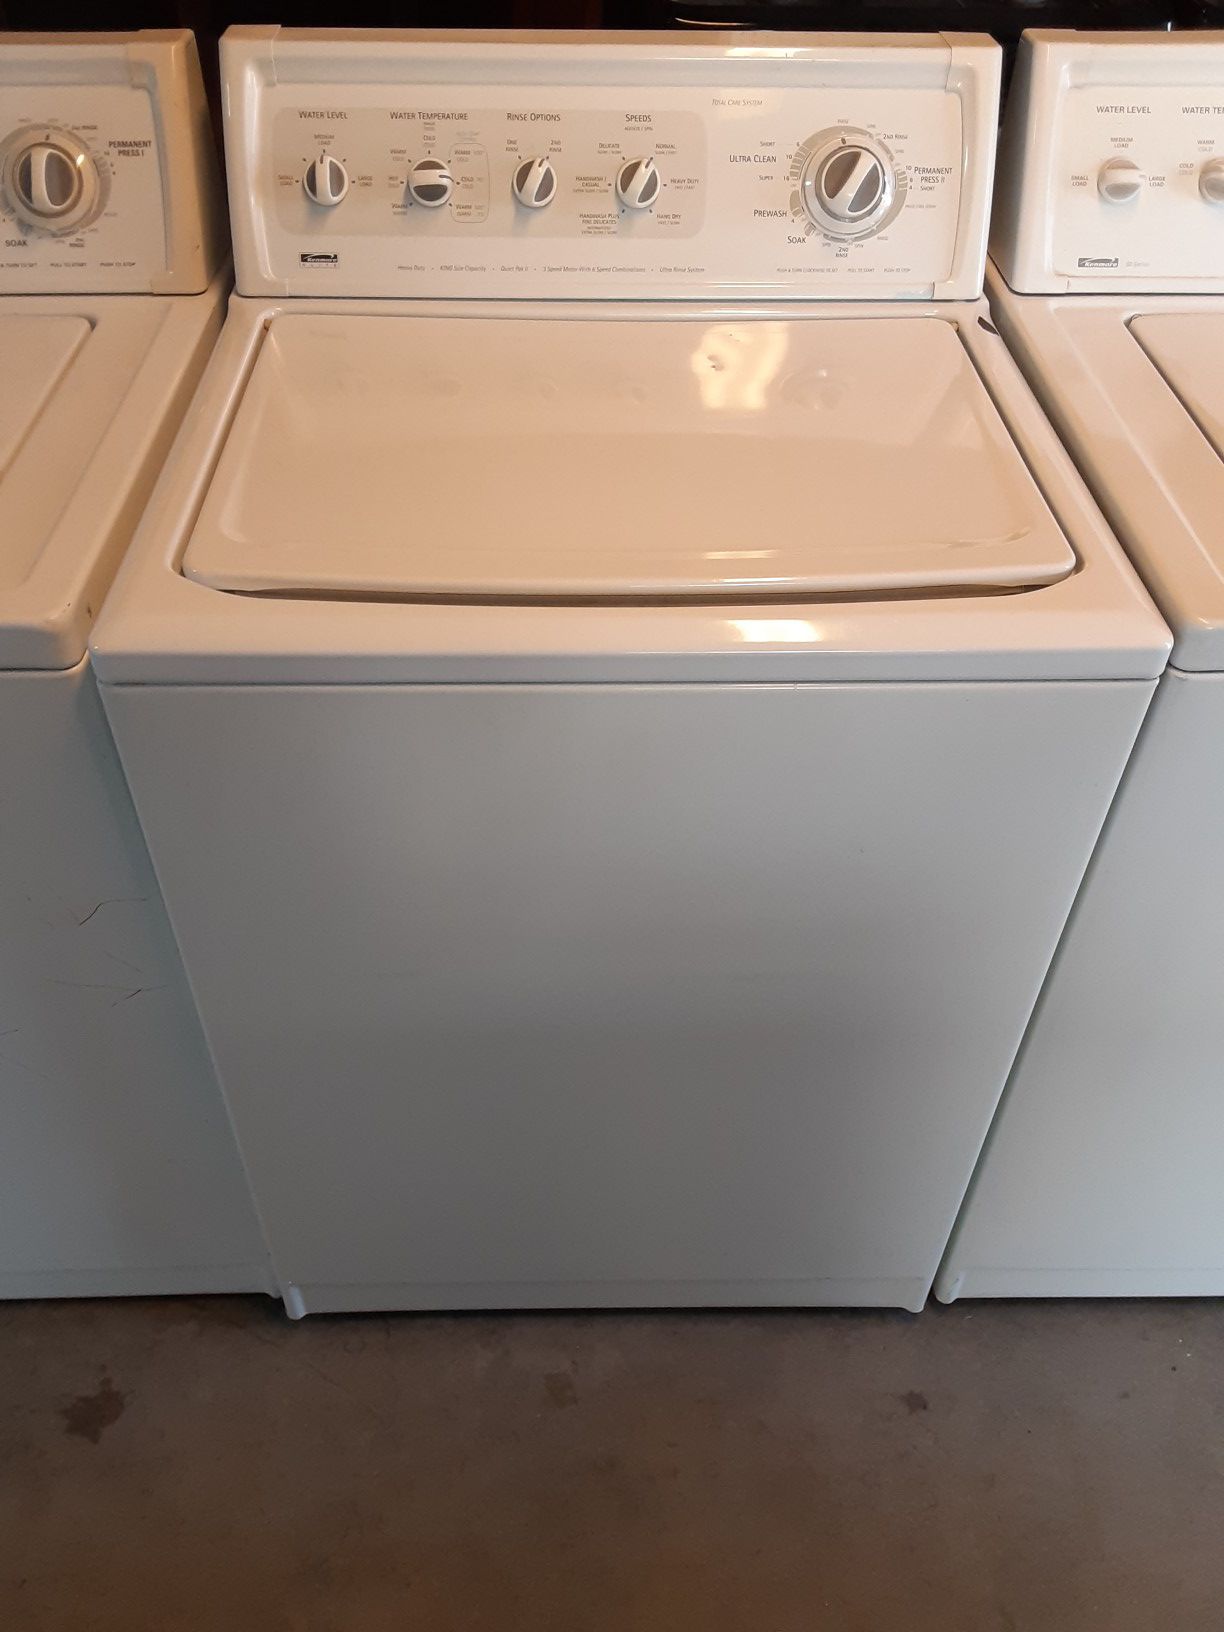 Kenmore washer like new 3month warranty